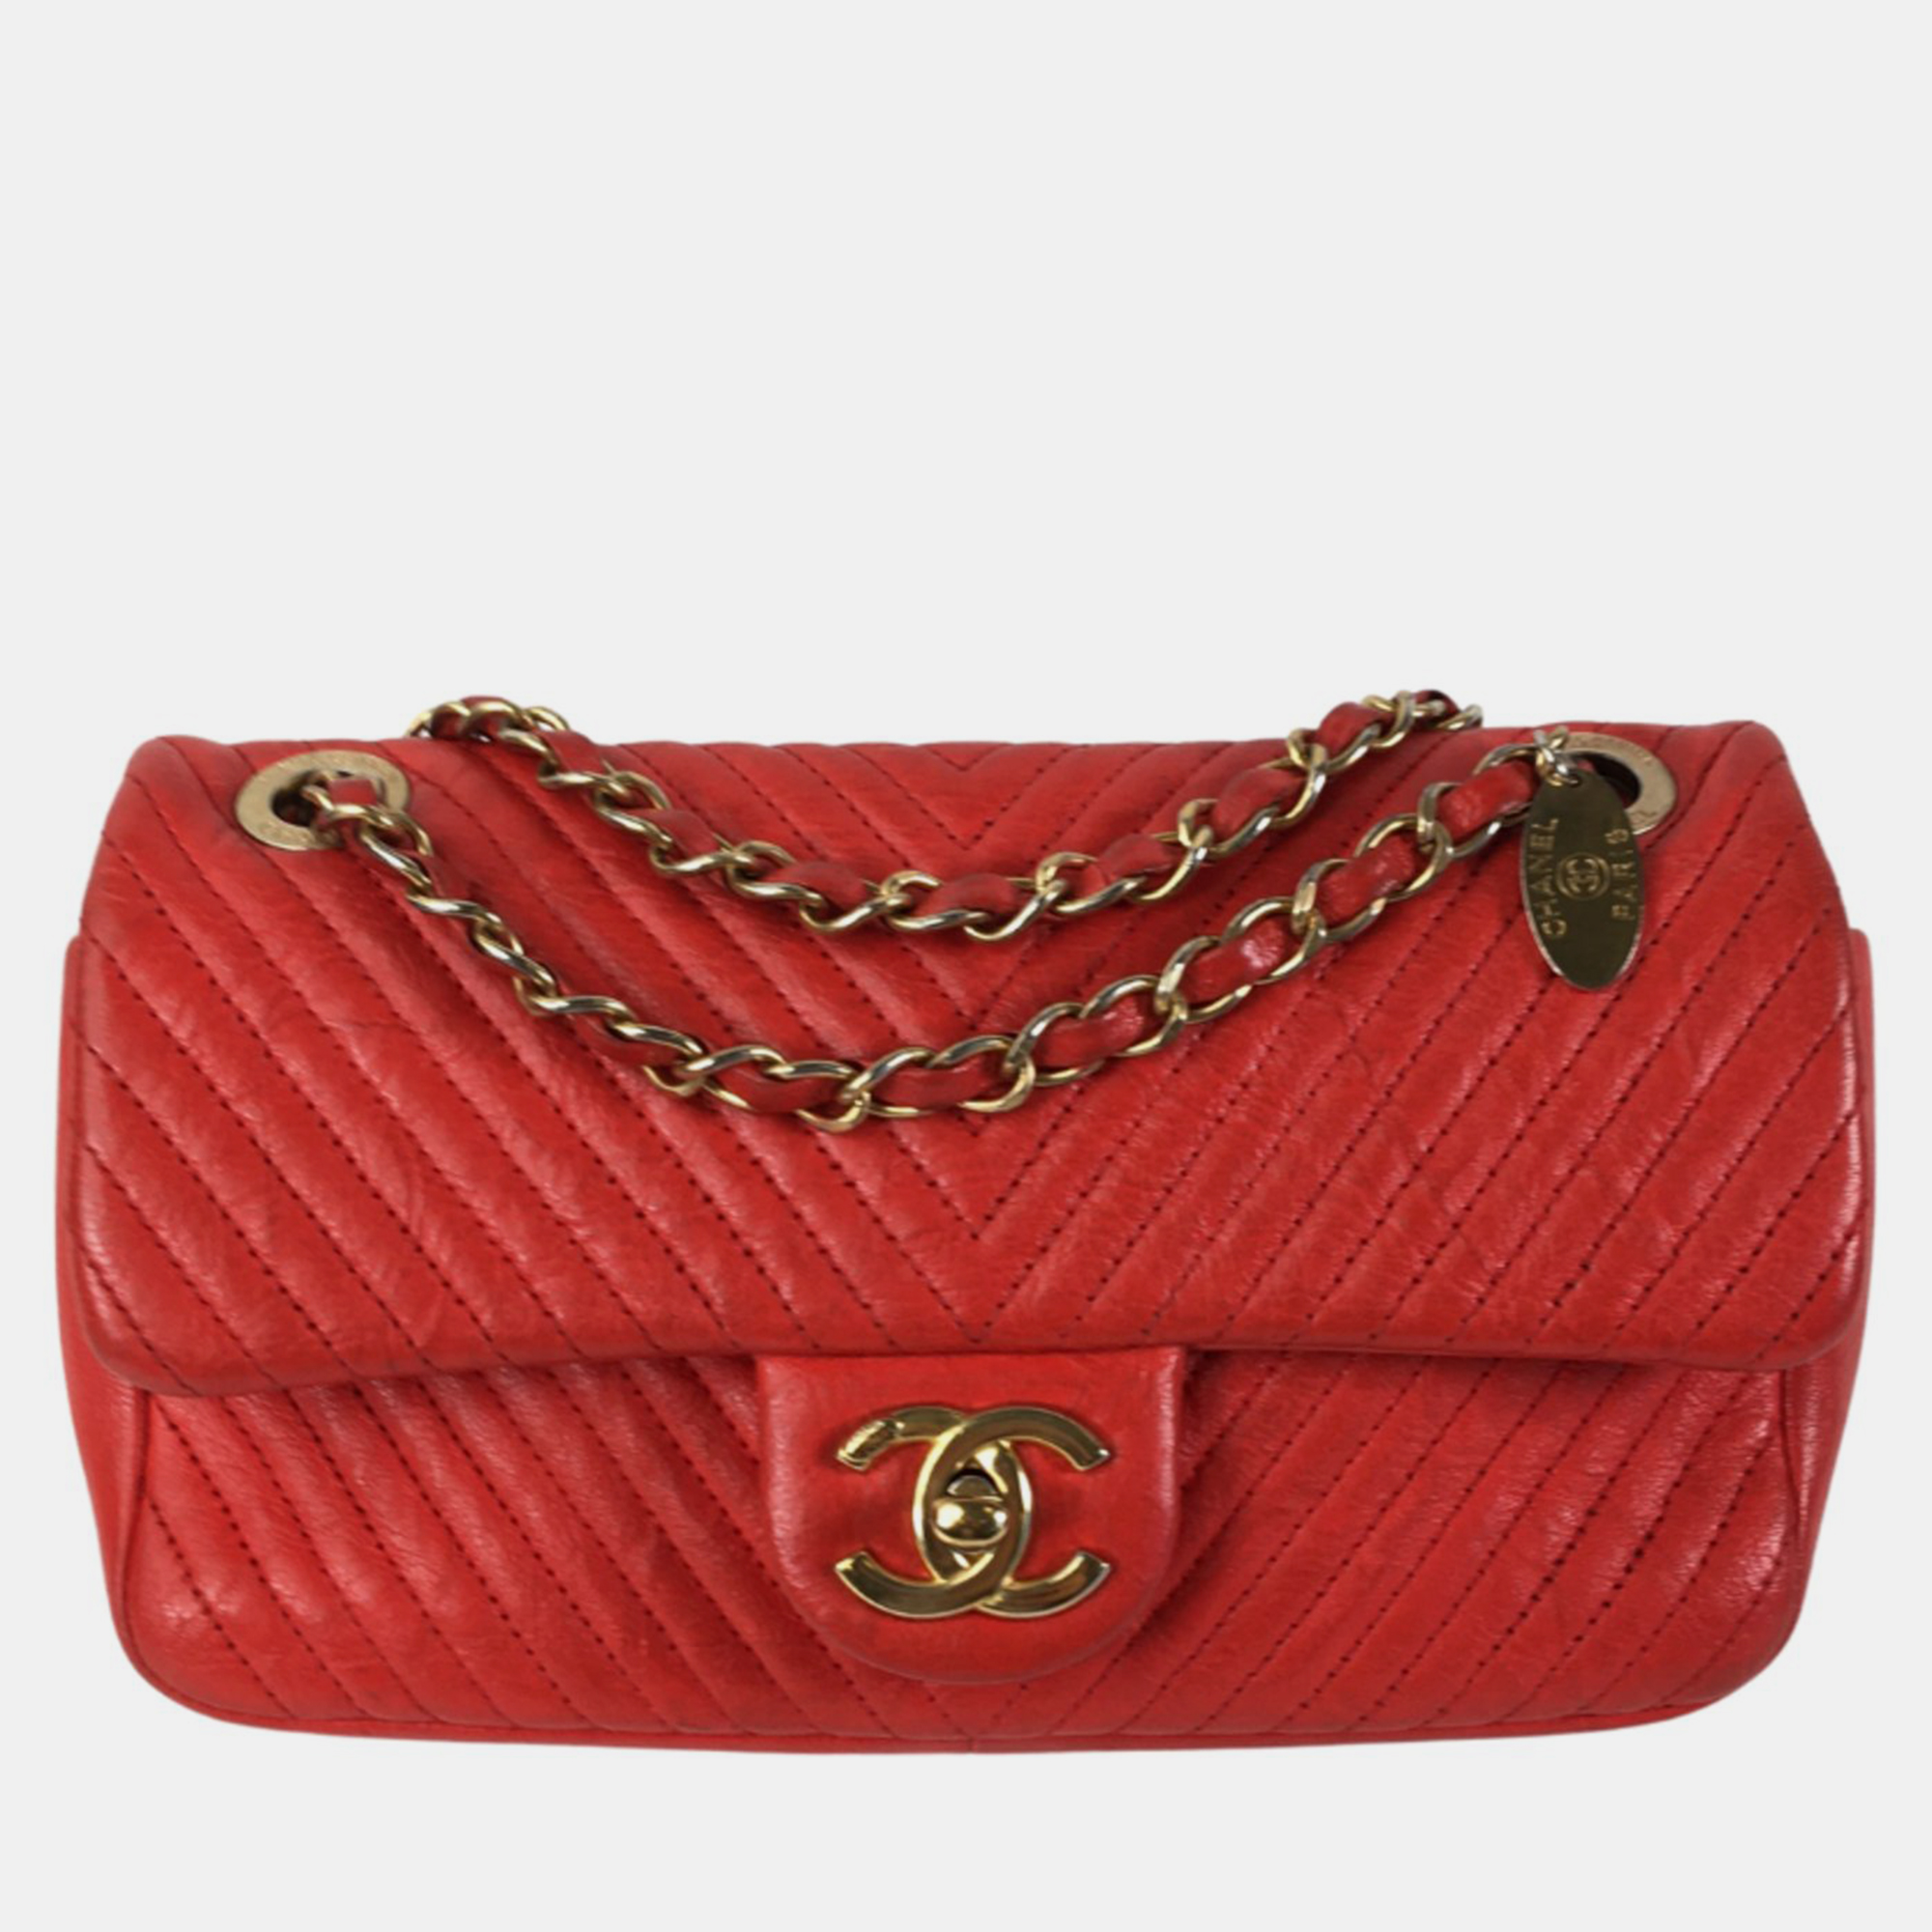 Chanel red medium wrinkled calfskin quilted chevron medallion charm surpique flap